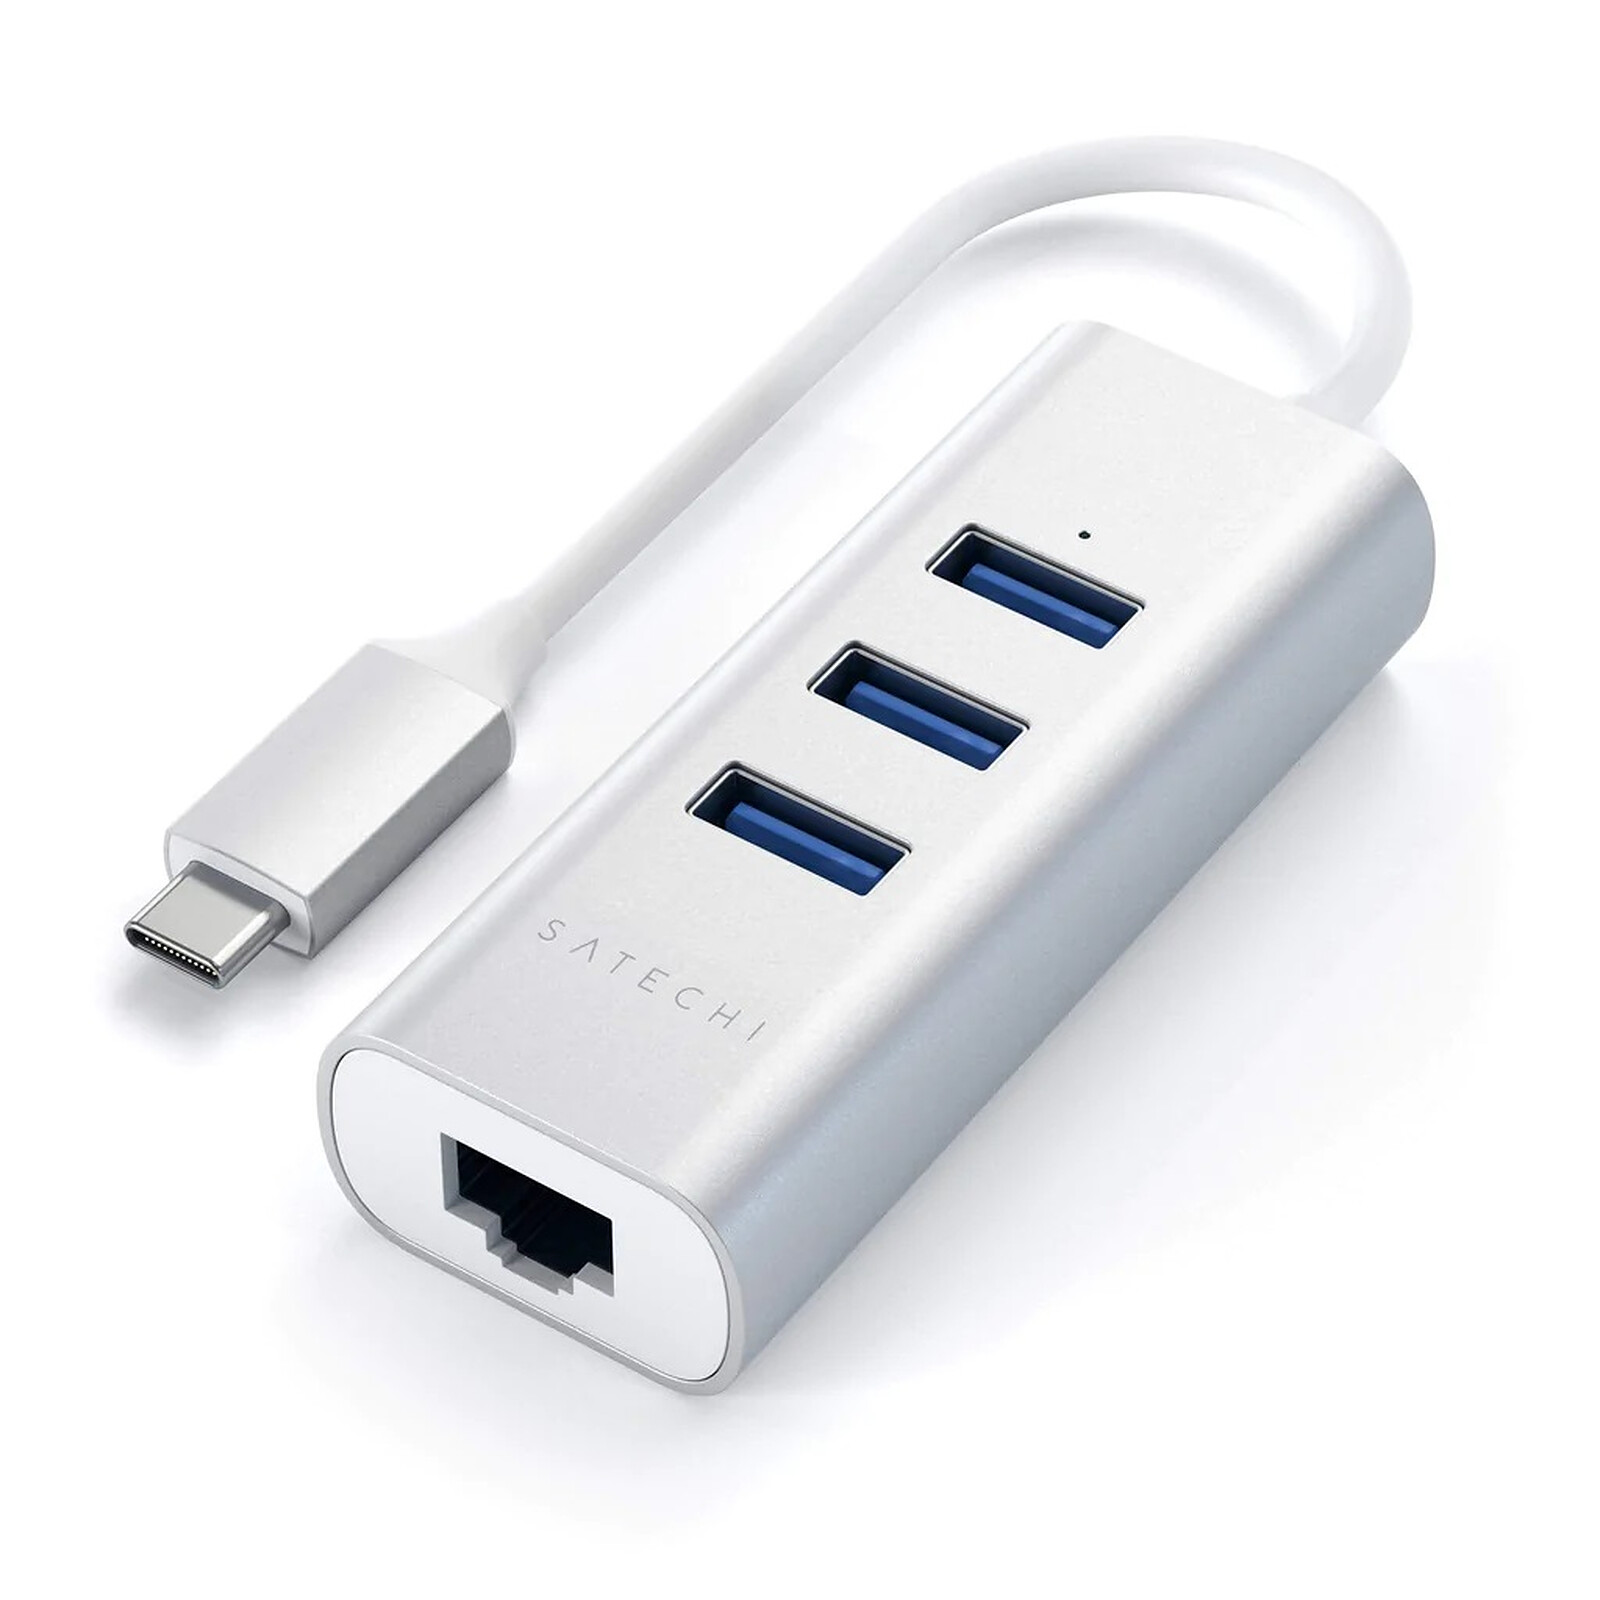 SATECHI 2-in-1 USB-C with 3 USB + Ethernet Ports (Silver) - Network card Satechi on LDLC